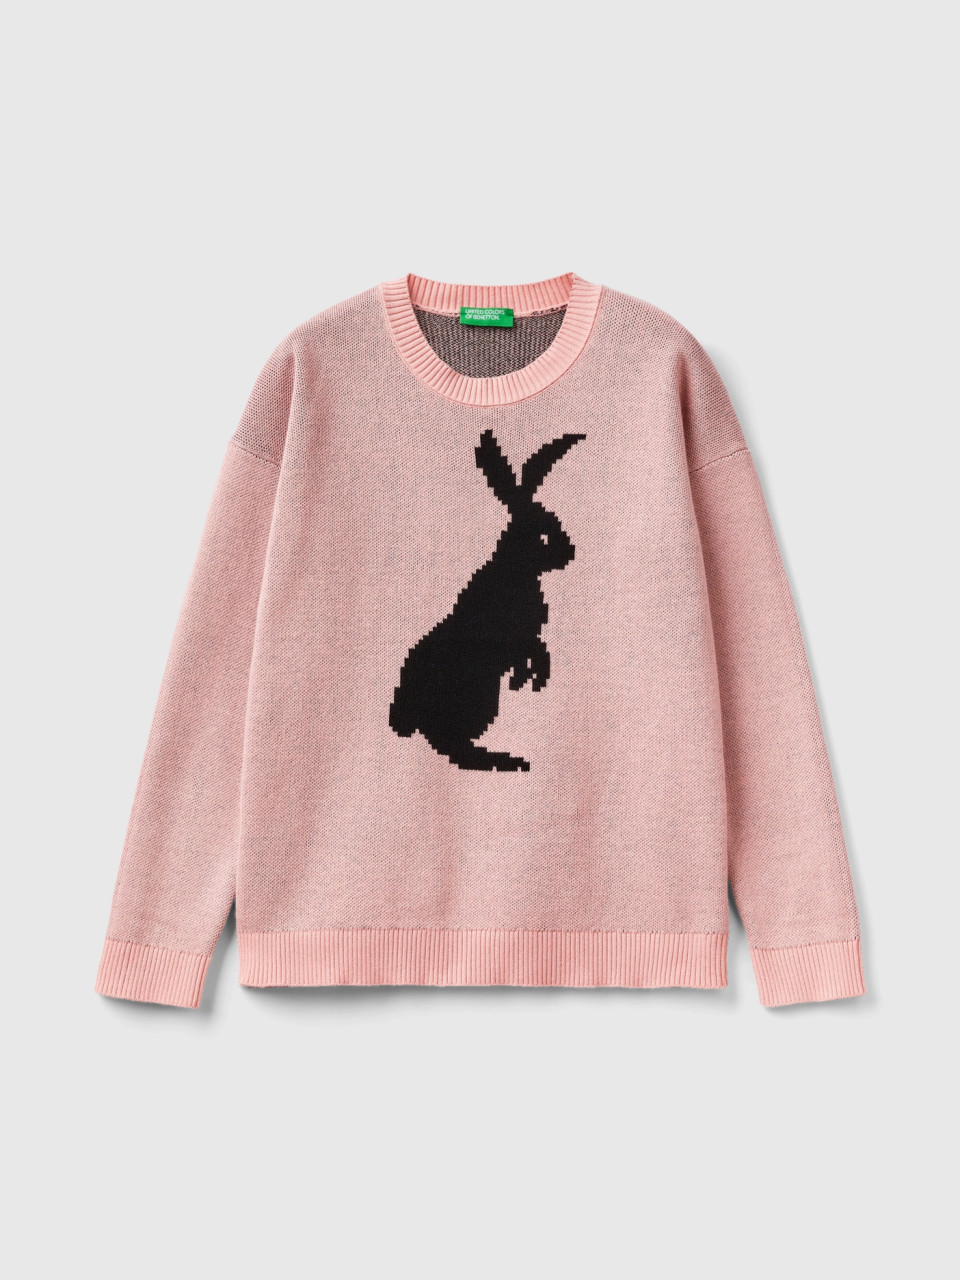 Benetton, Sweater With Bunny Design, Pink, Kids